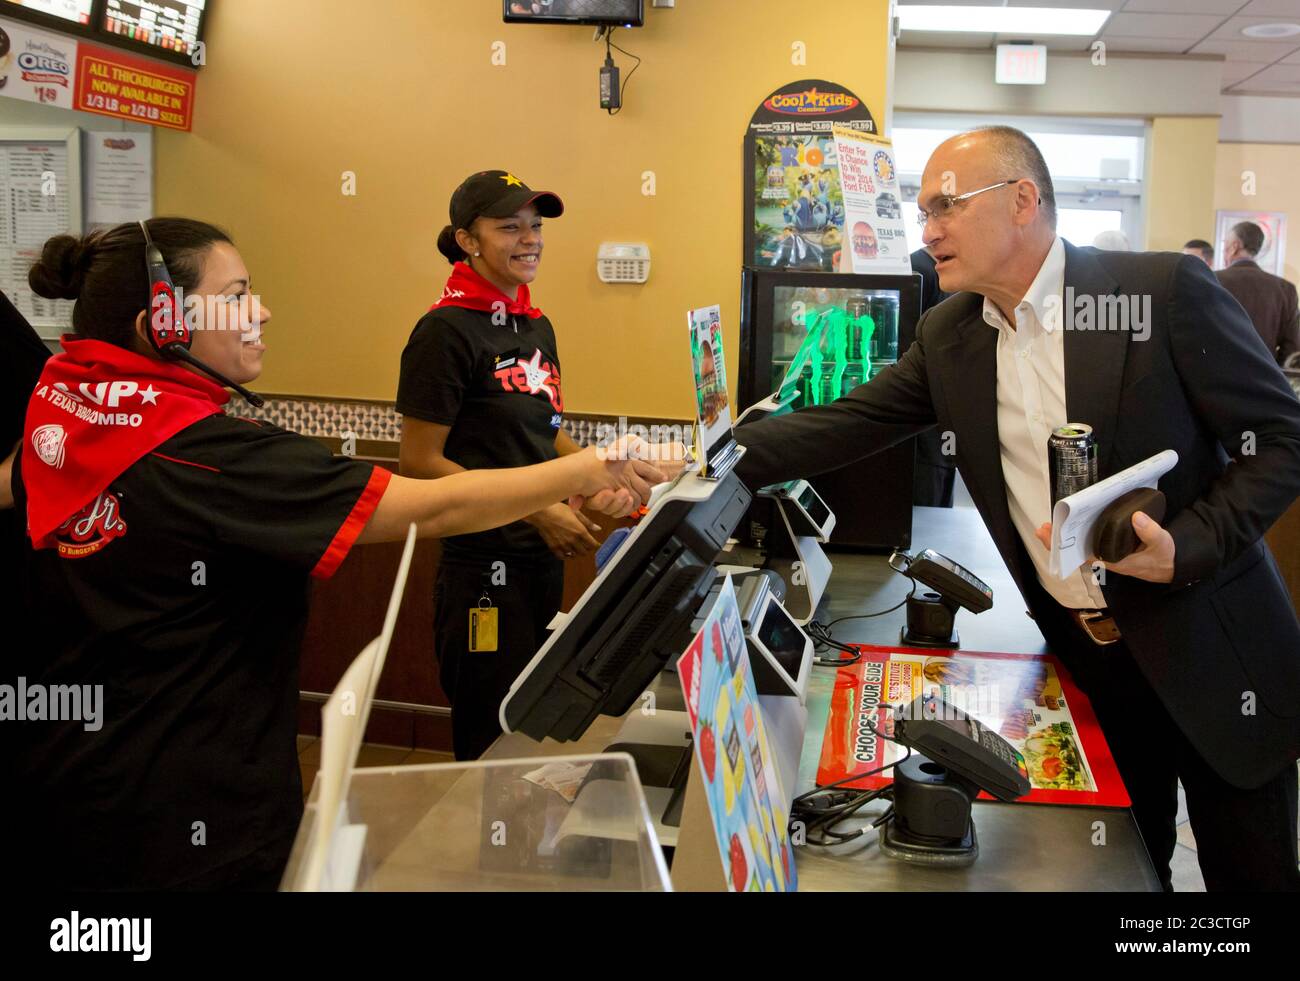 Austin Texas USA, August 6 2014: Carl's Jr. Restaurant CEO Andrew Puzder greets employees at an Austin location of the fast-food chain. Here the highly compensated executive shakes hands with low-paid hourly worker employees. ©Marjorie Kamys Cotera/Daemmrich Photography Stock Photo